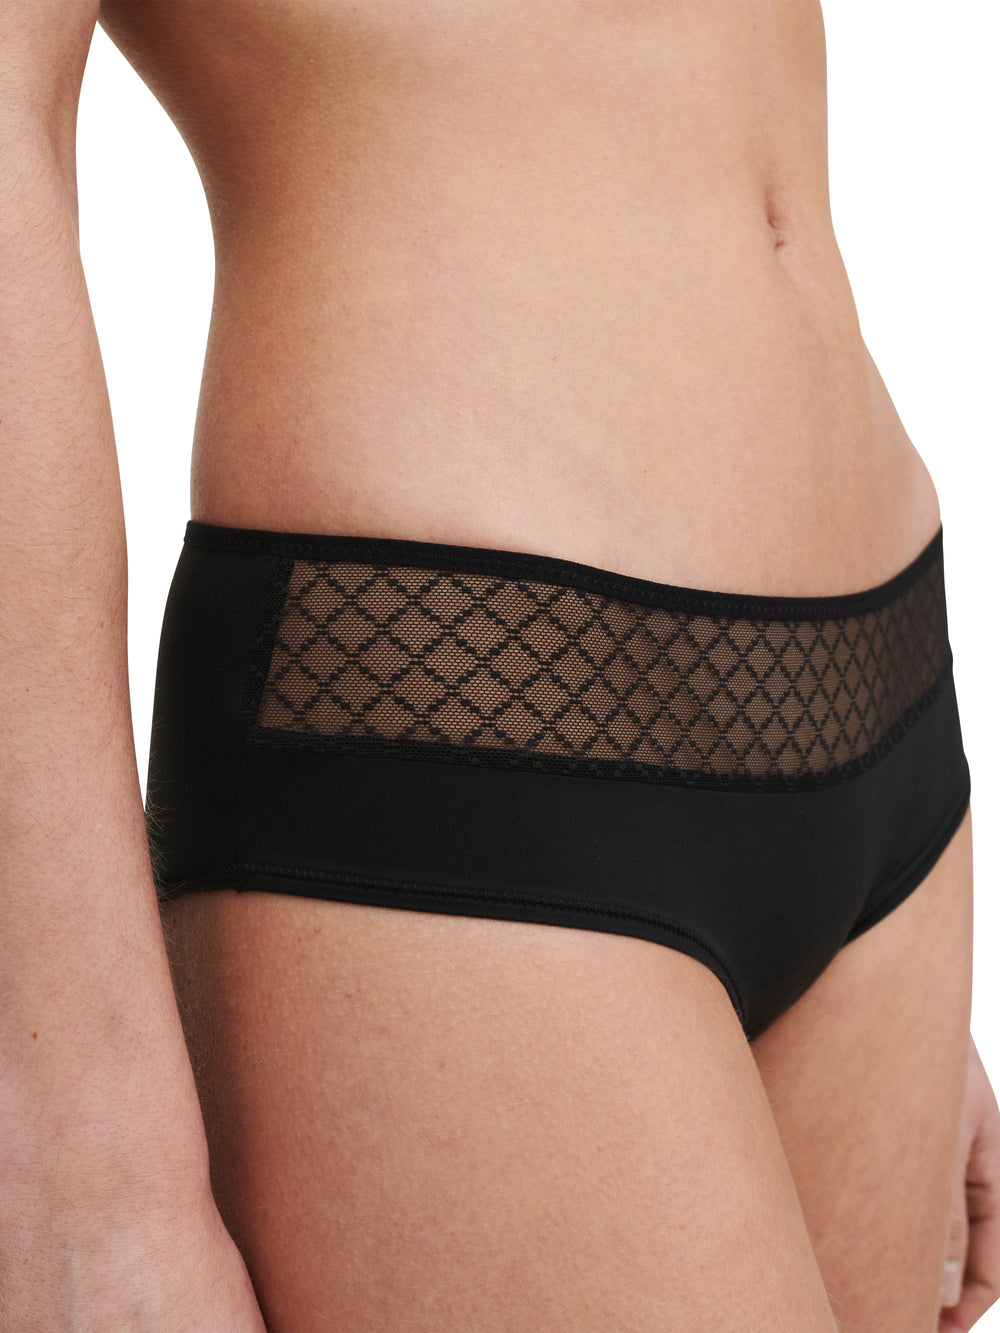 Chantelle EasyFeel - Norah Chic Covering Shorty Black Shorty Chantelle EasyFeel